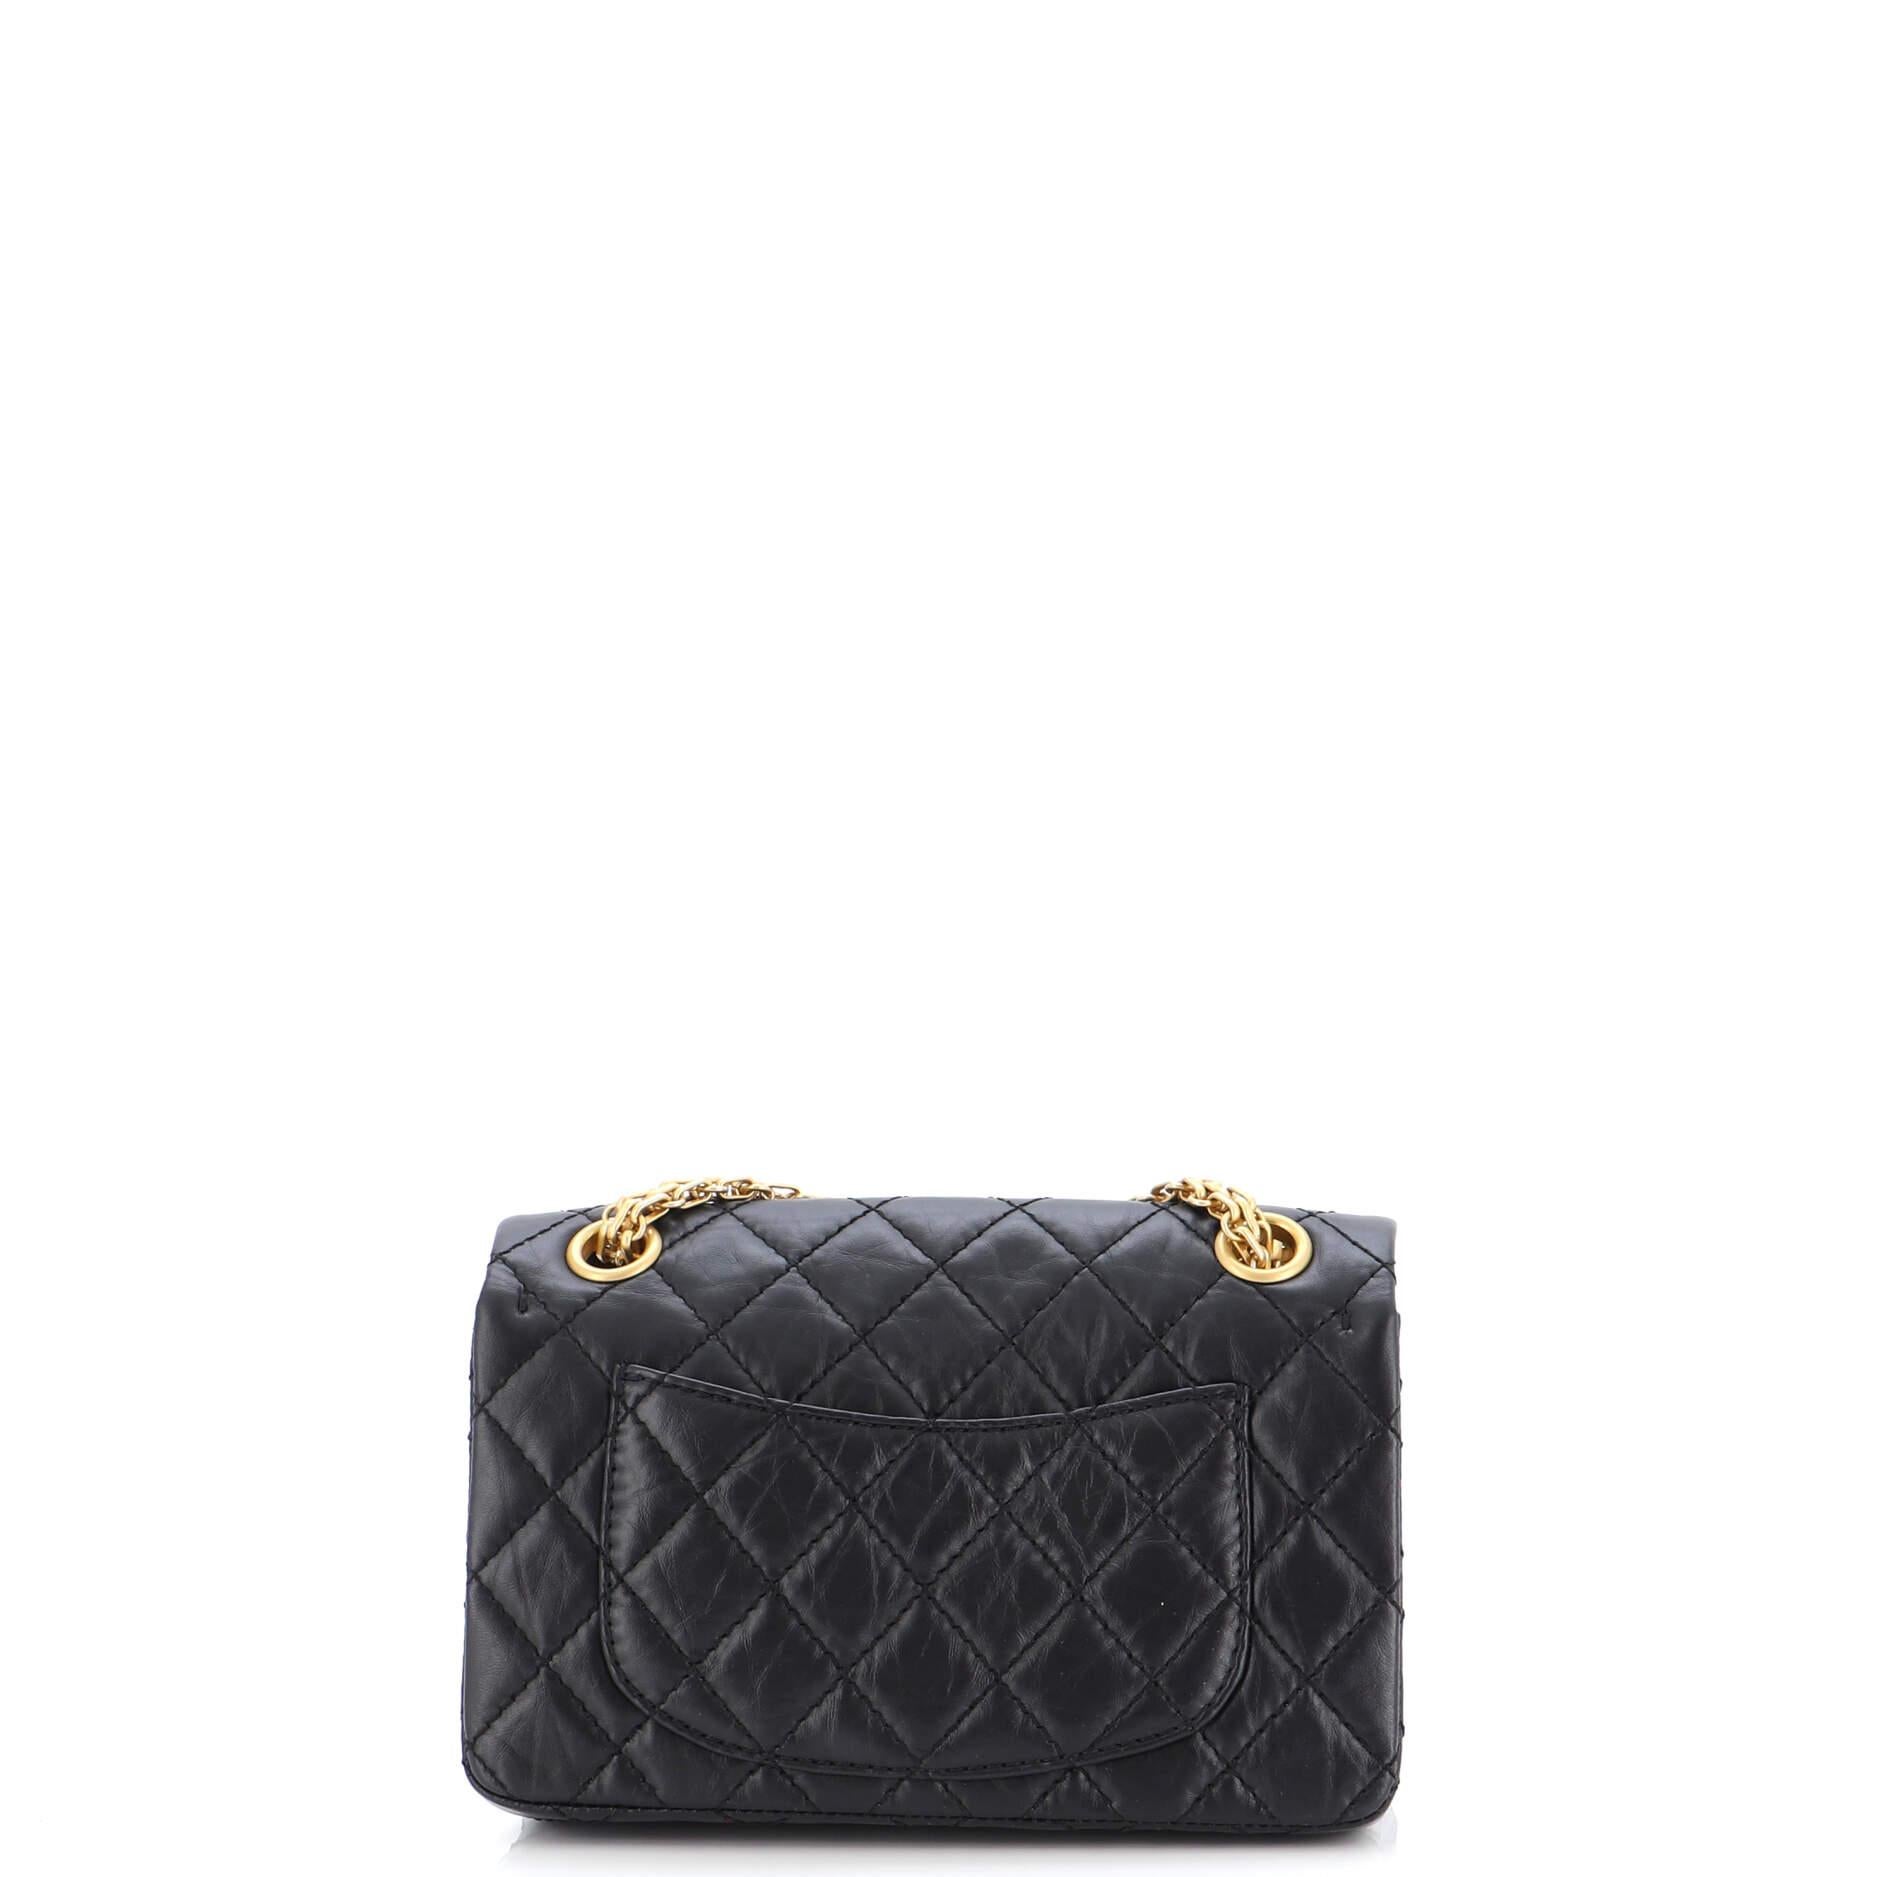 Women's or Men's Chanel Reissue 2.55 Flap Bag Quilted Aged Calfskin Mini